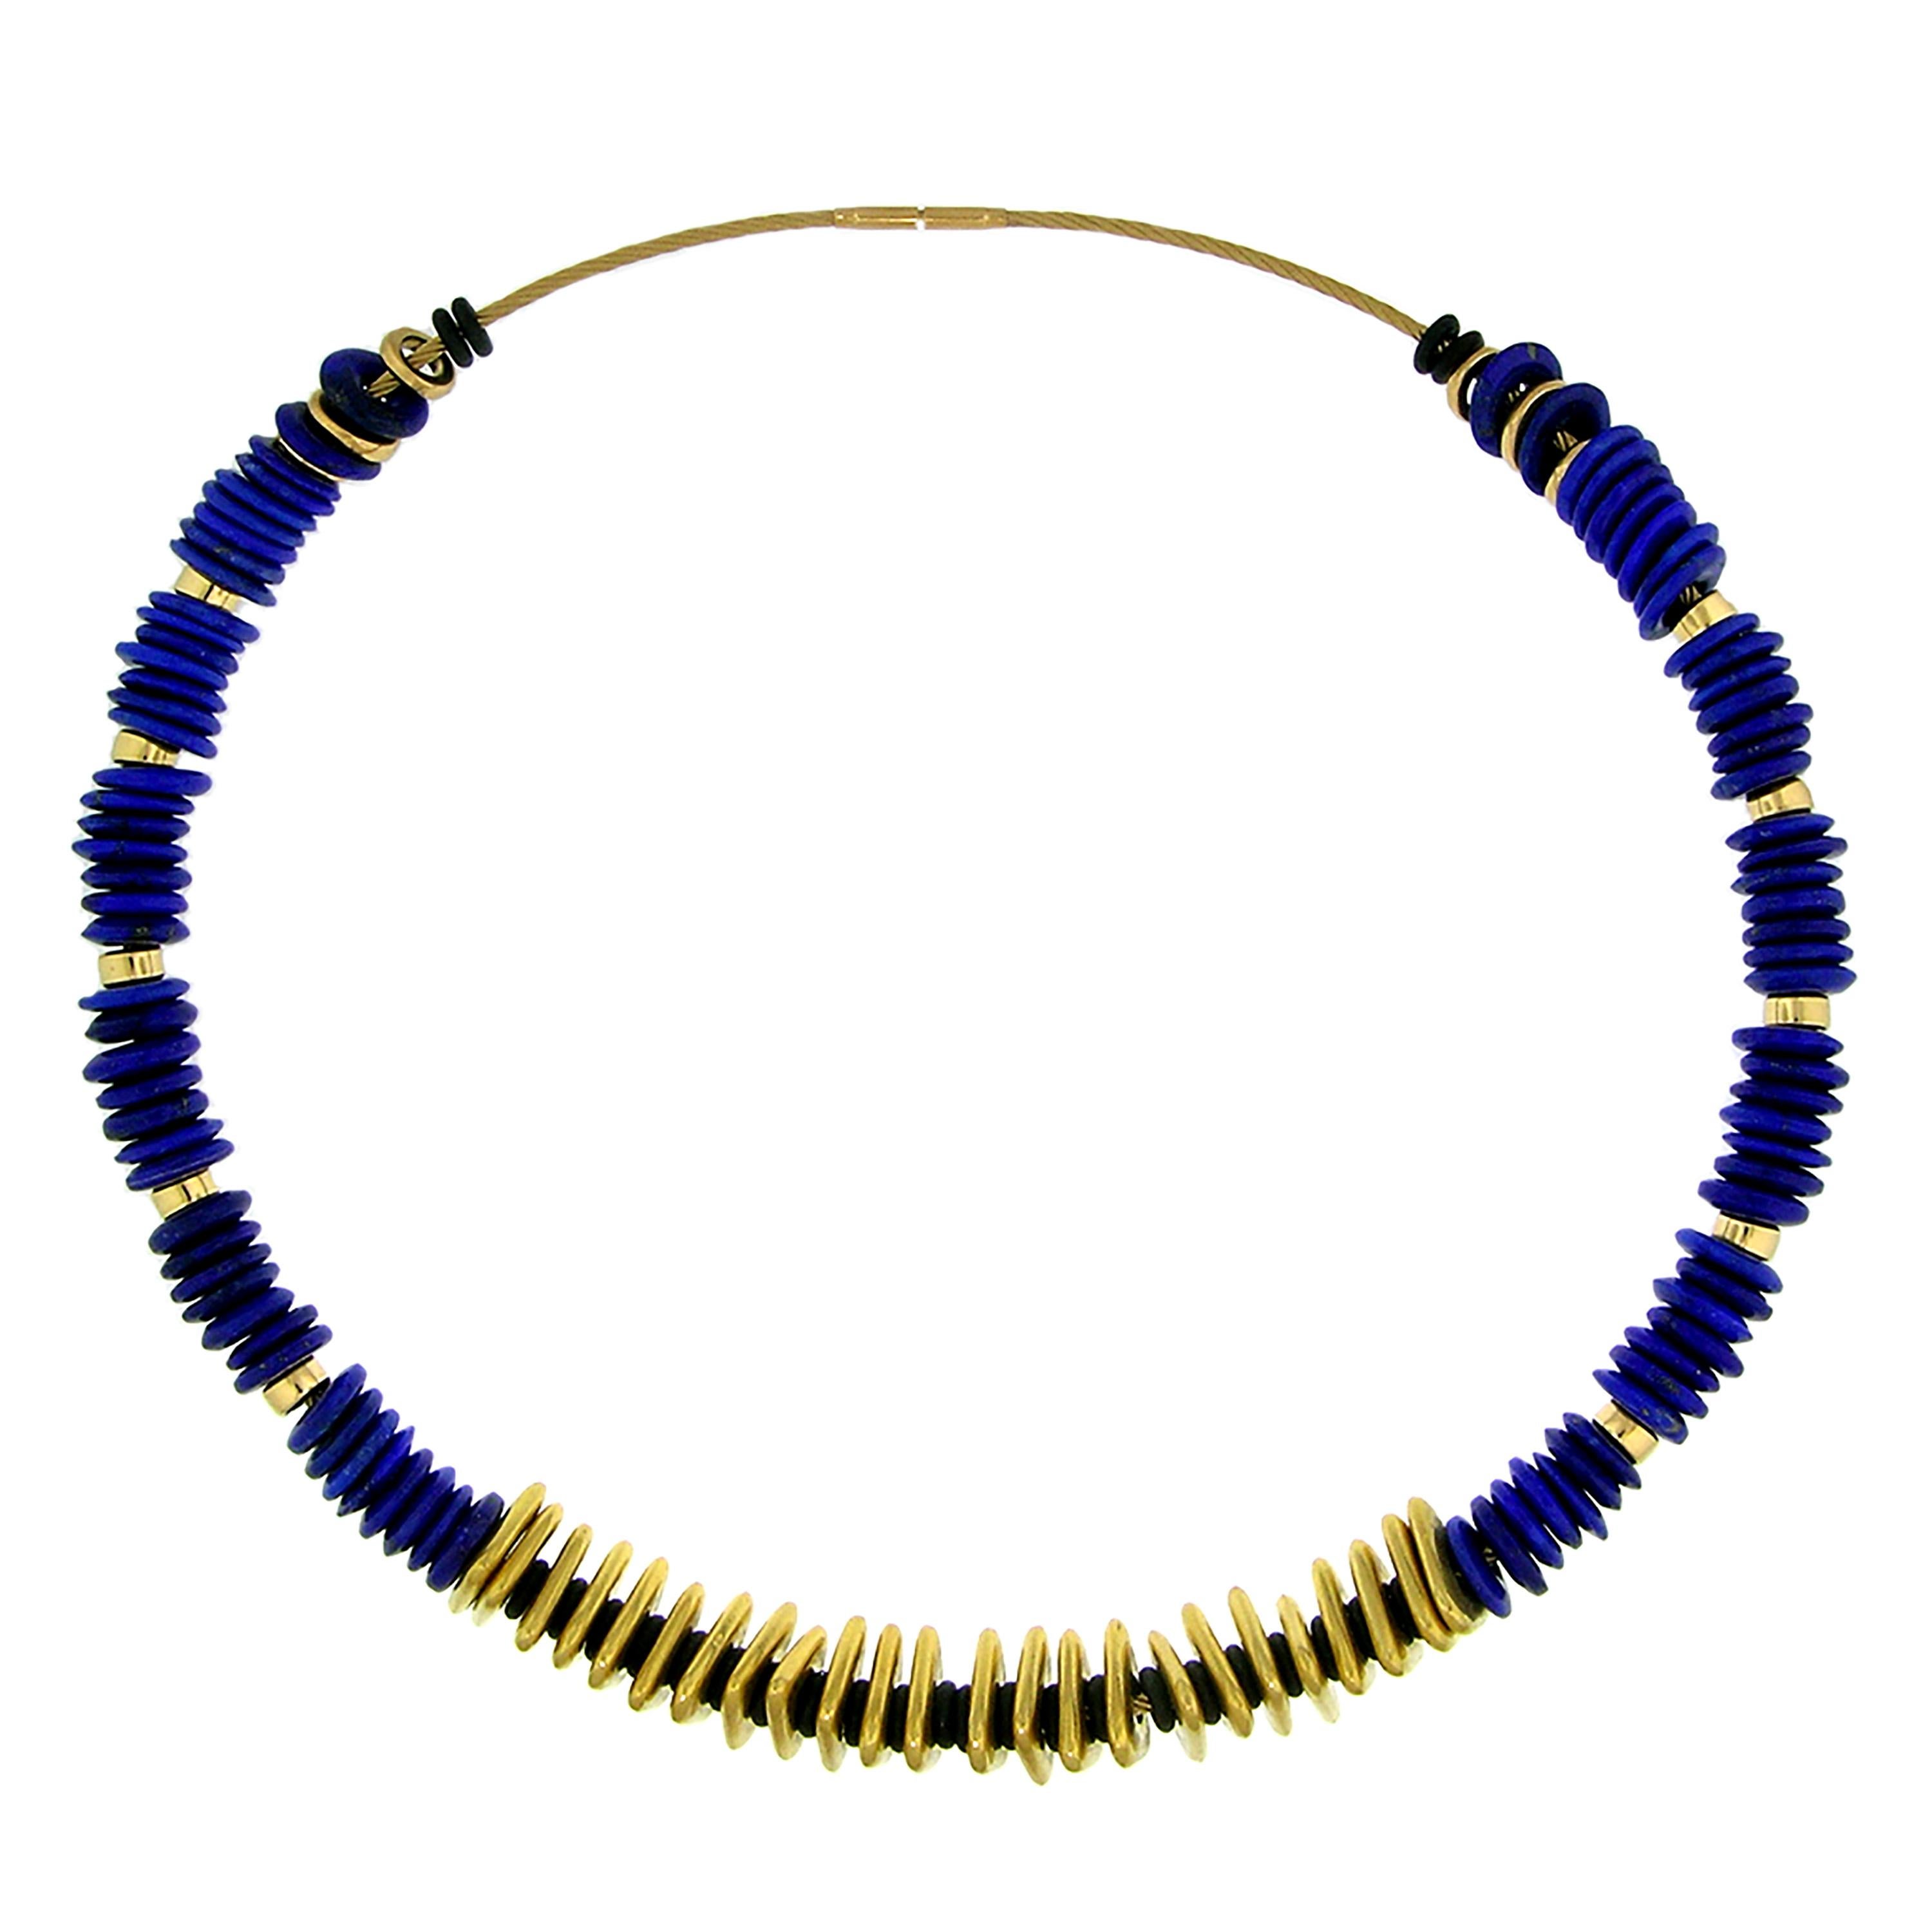 This gemstone beaded necklace features exquisitely made, knife-edged lapis beads paired with an abundance of 20kt handmade gold triangles and unexpectedly delightful black neoprene spacers.

This whimsically conceived necklace allows for